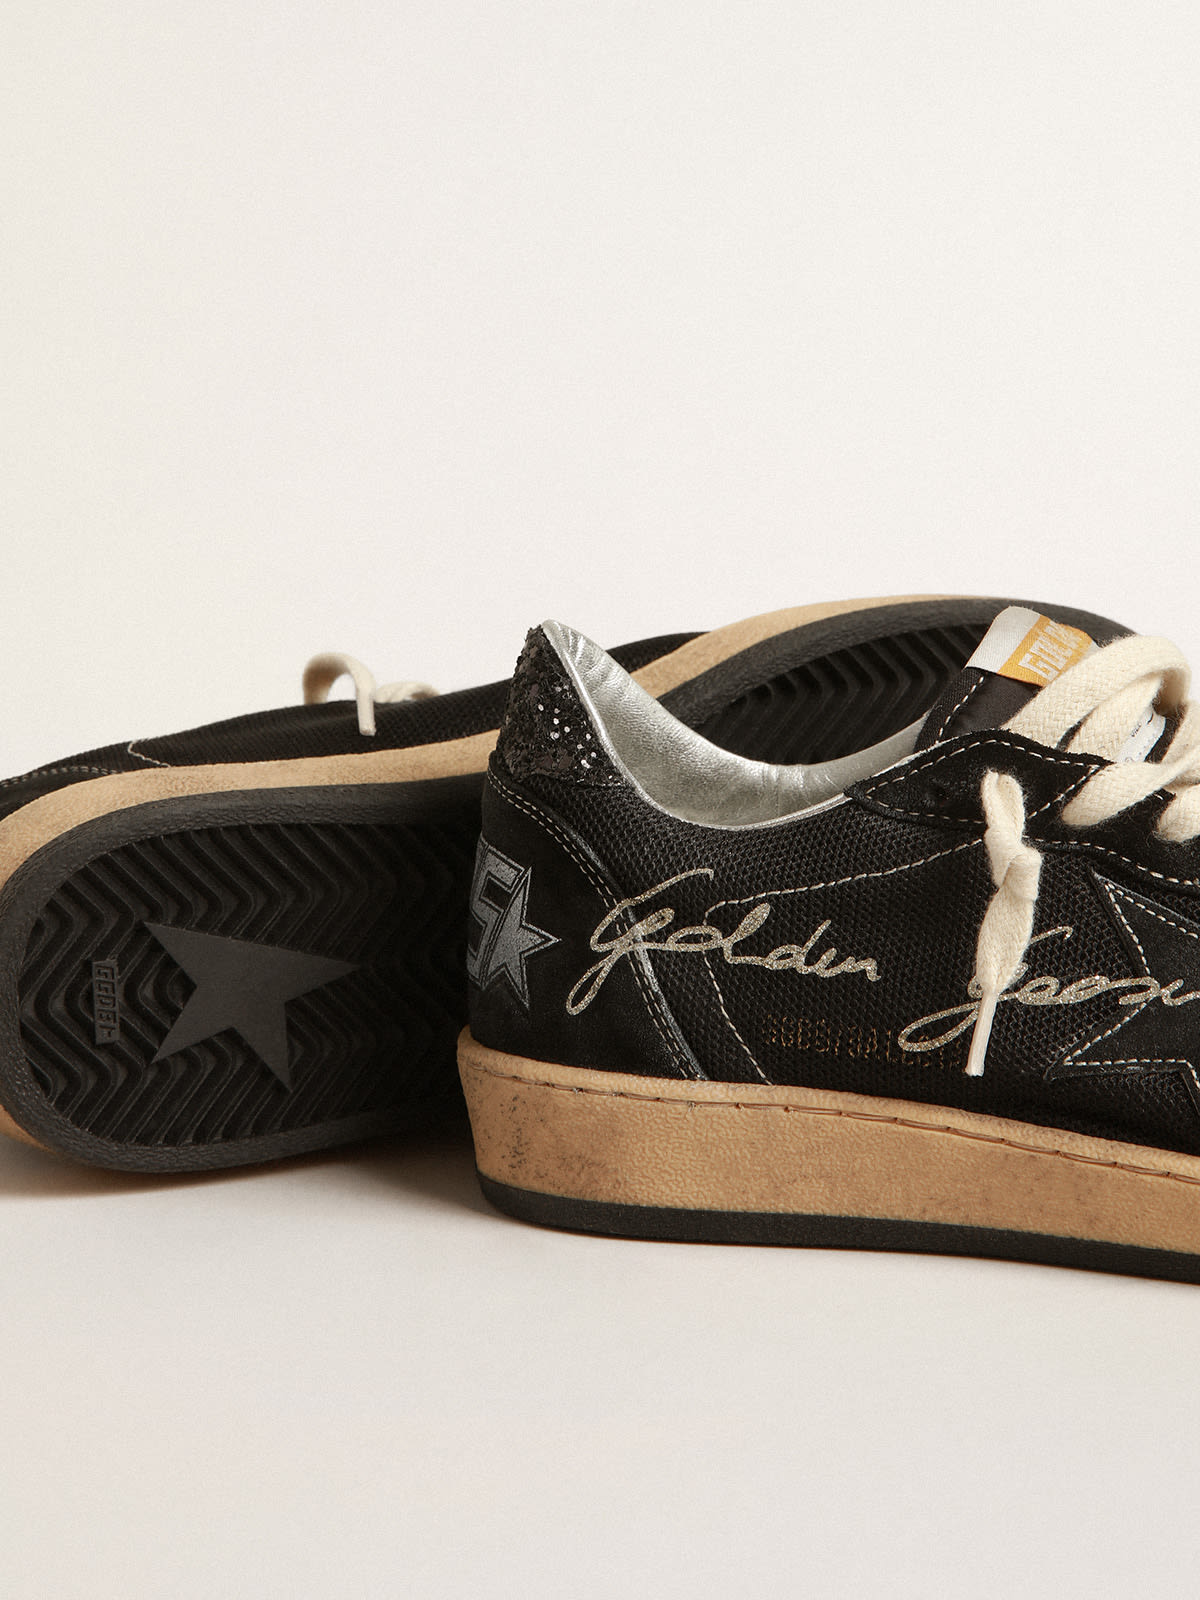 Golden Goose - Ball Star in black mesh with black suede star in 